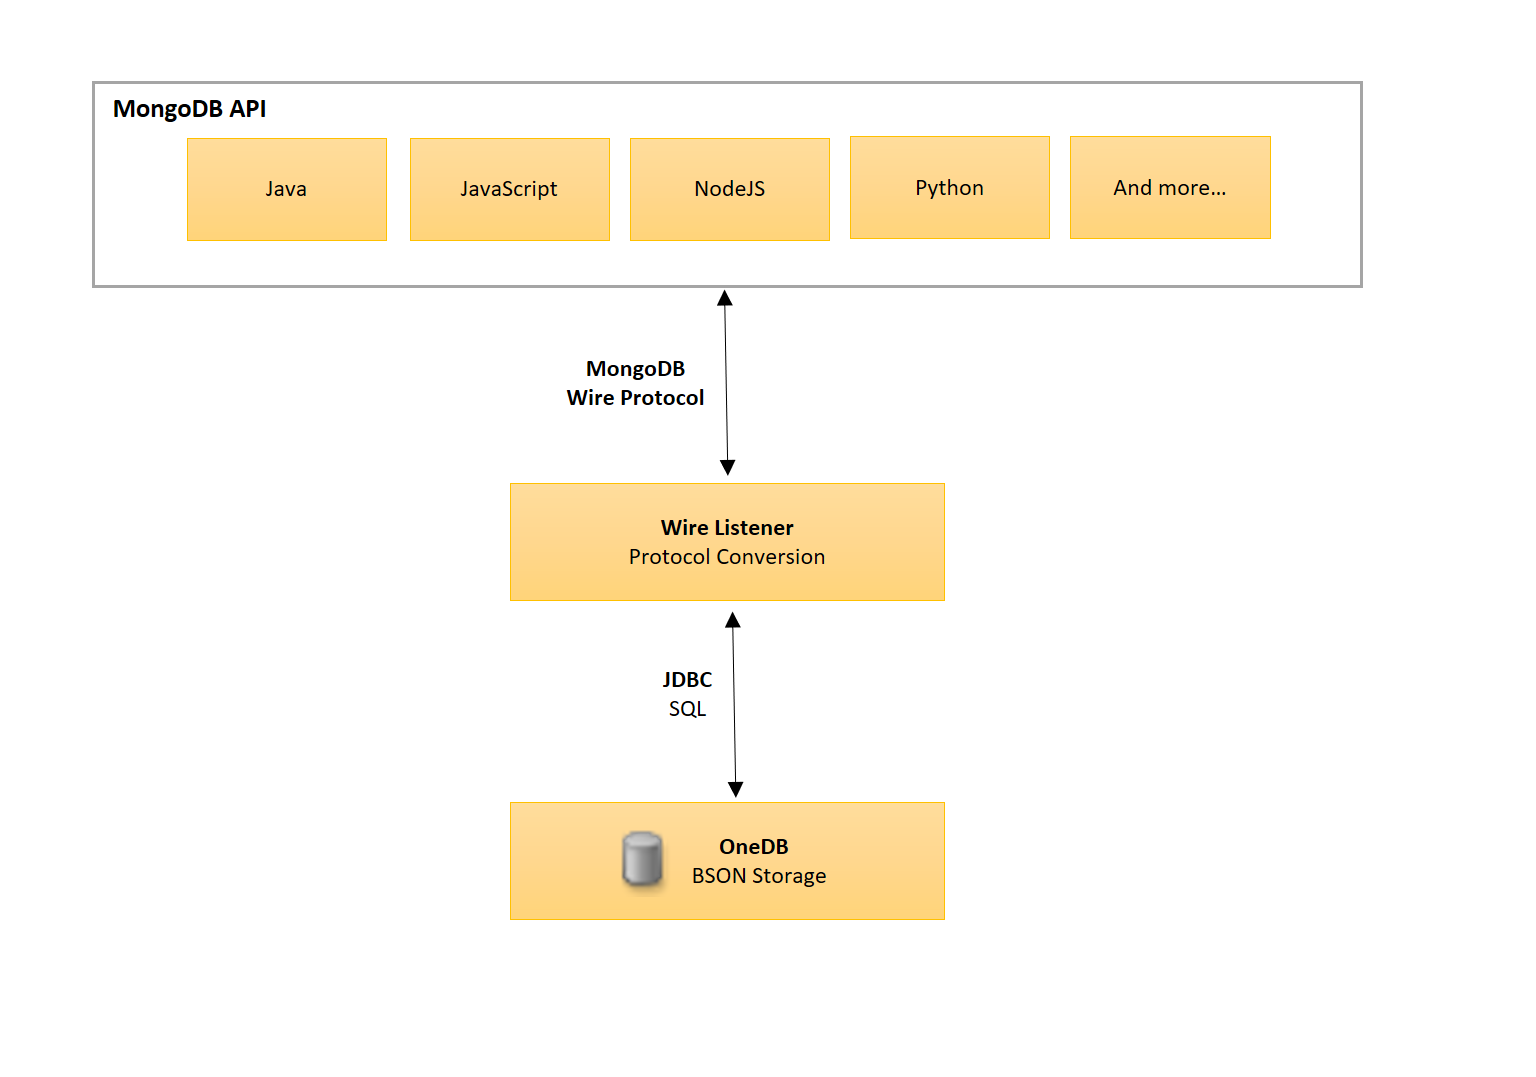 This graphic depicts the MongoDB clients that connect to the HCL OneDB server through the wire listener.